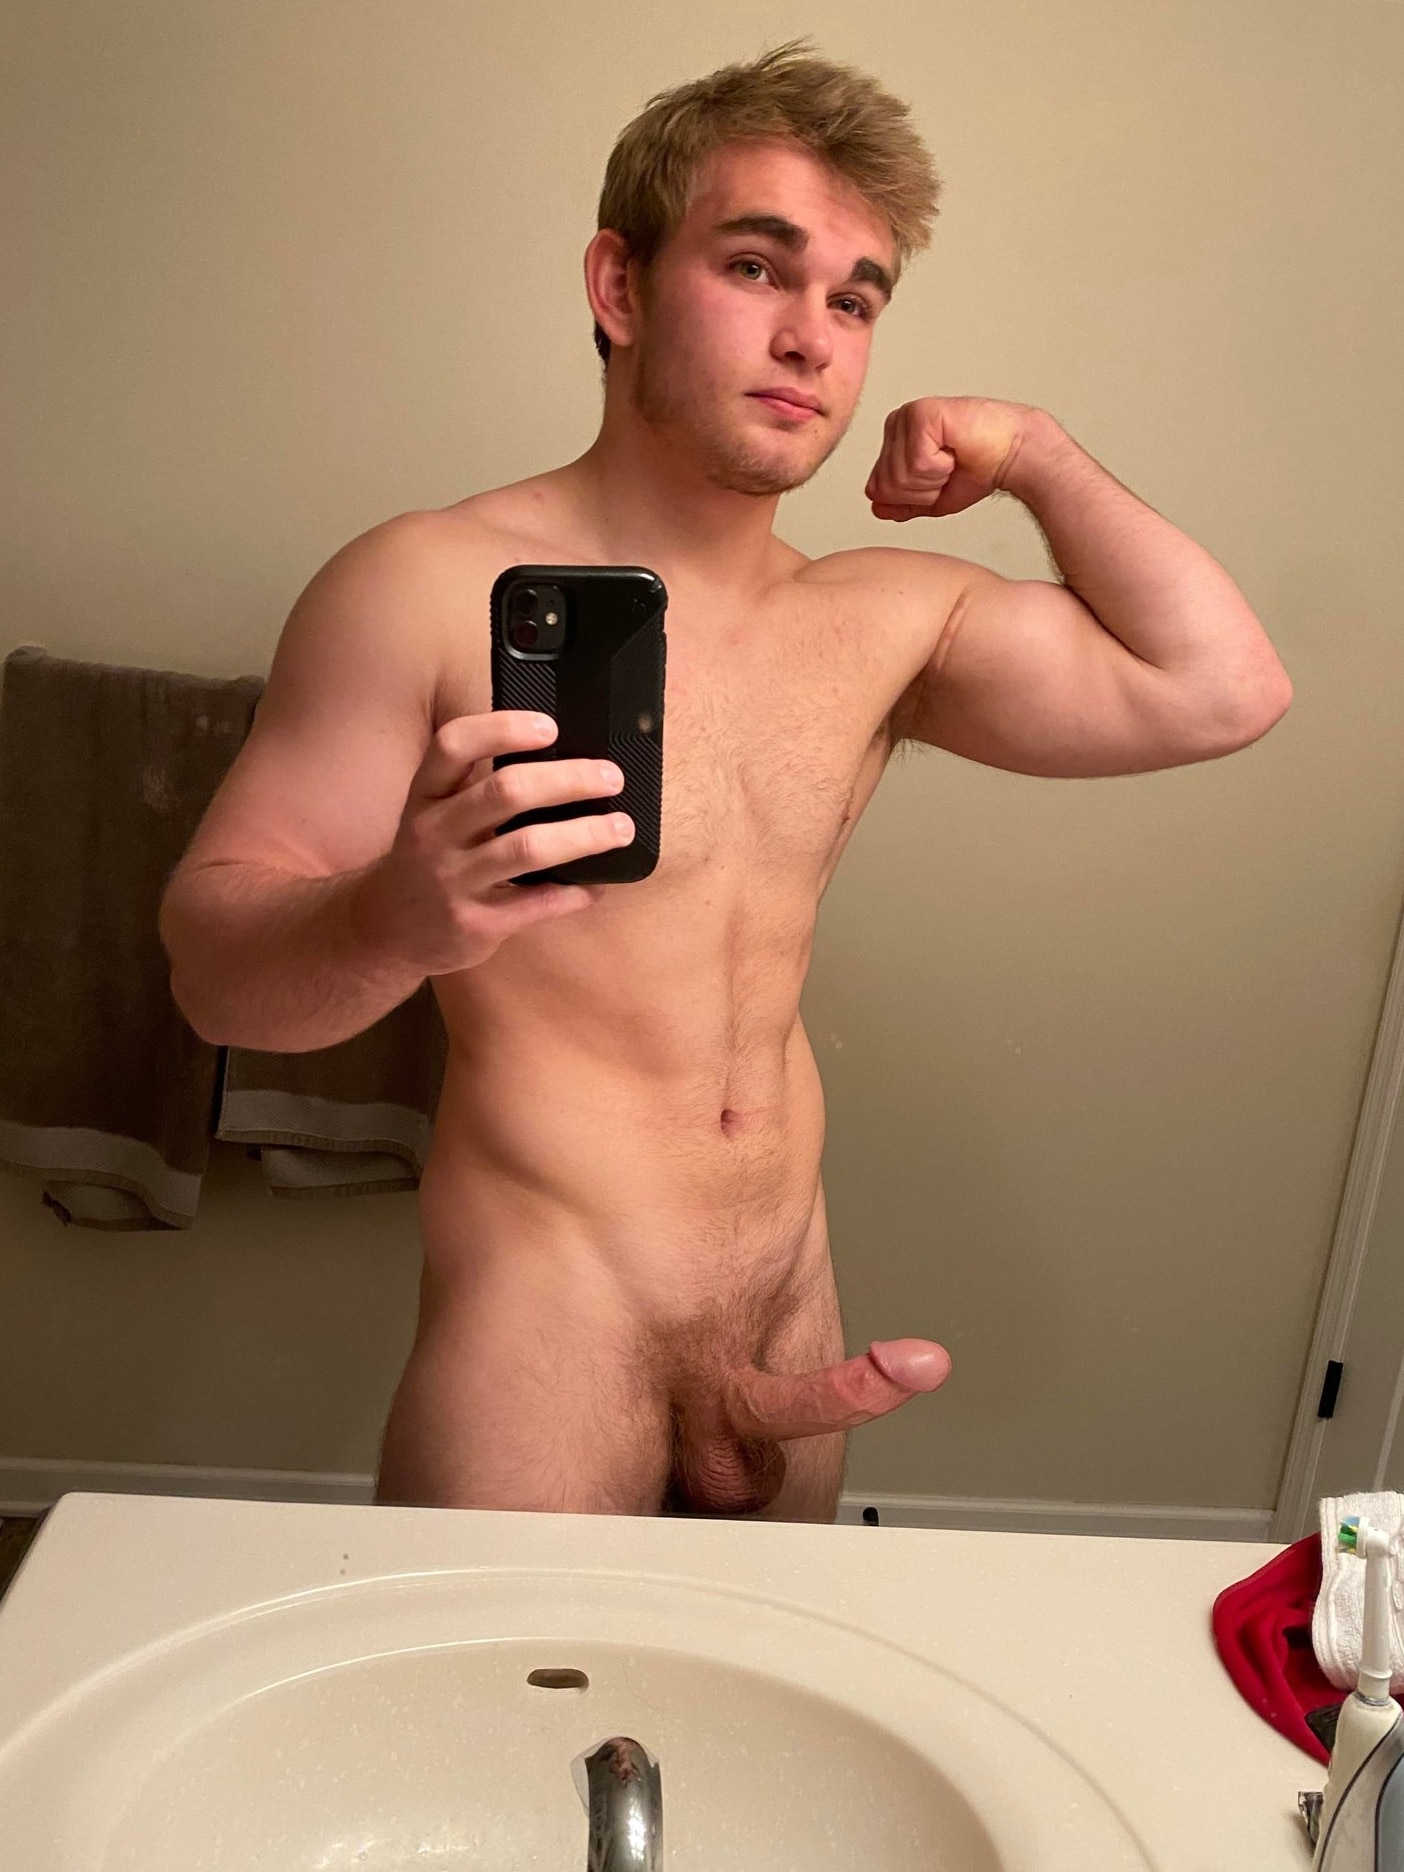 Horny nude boy flexing muscles